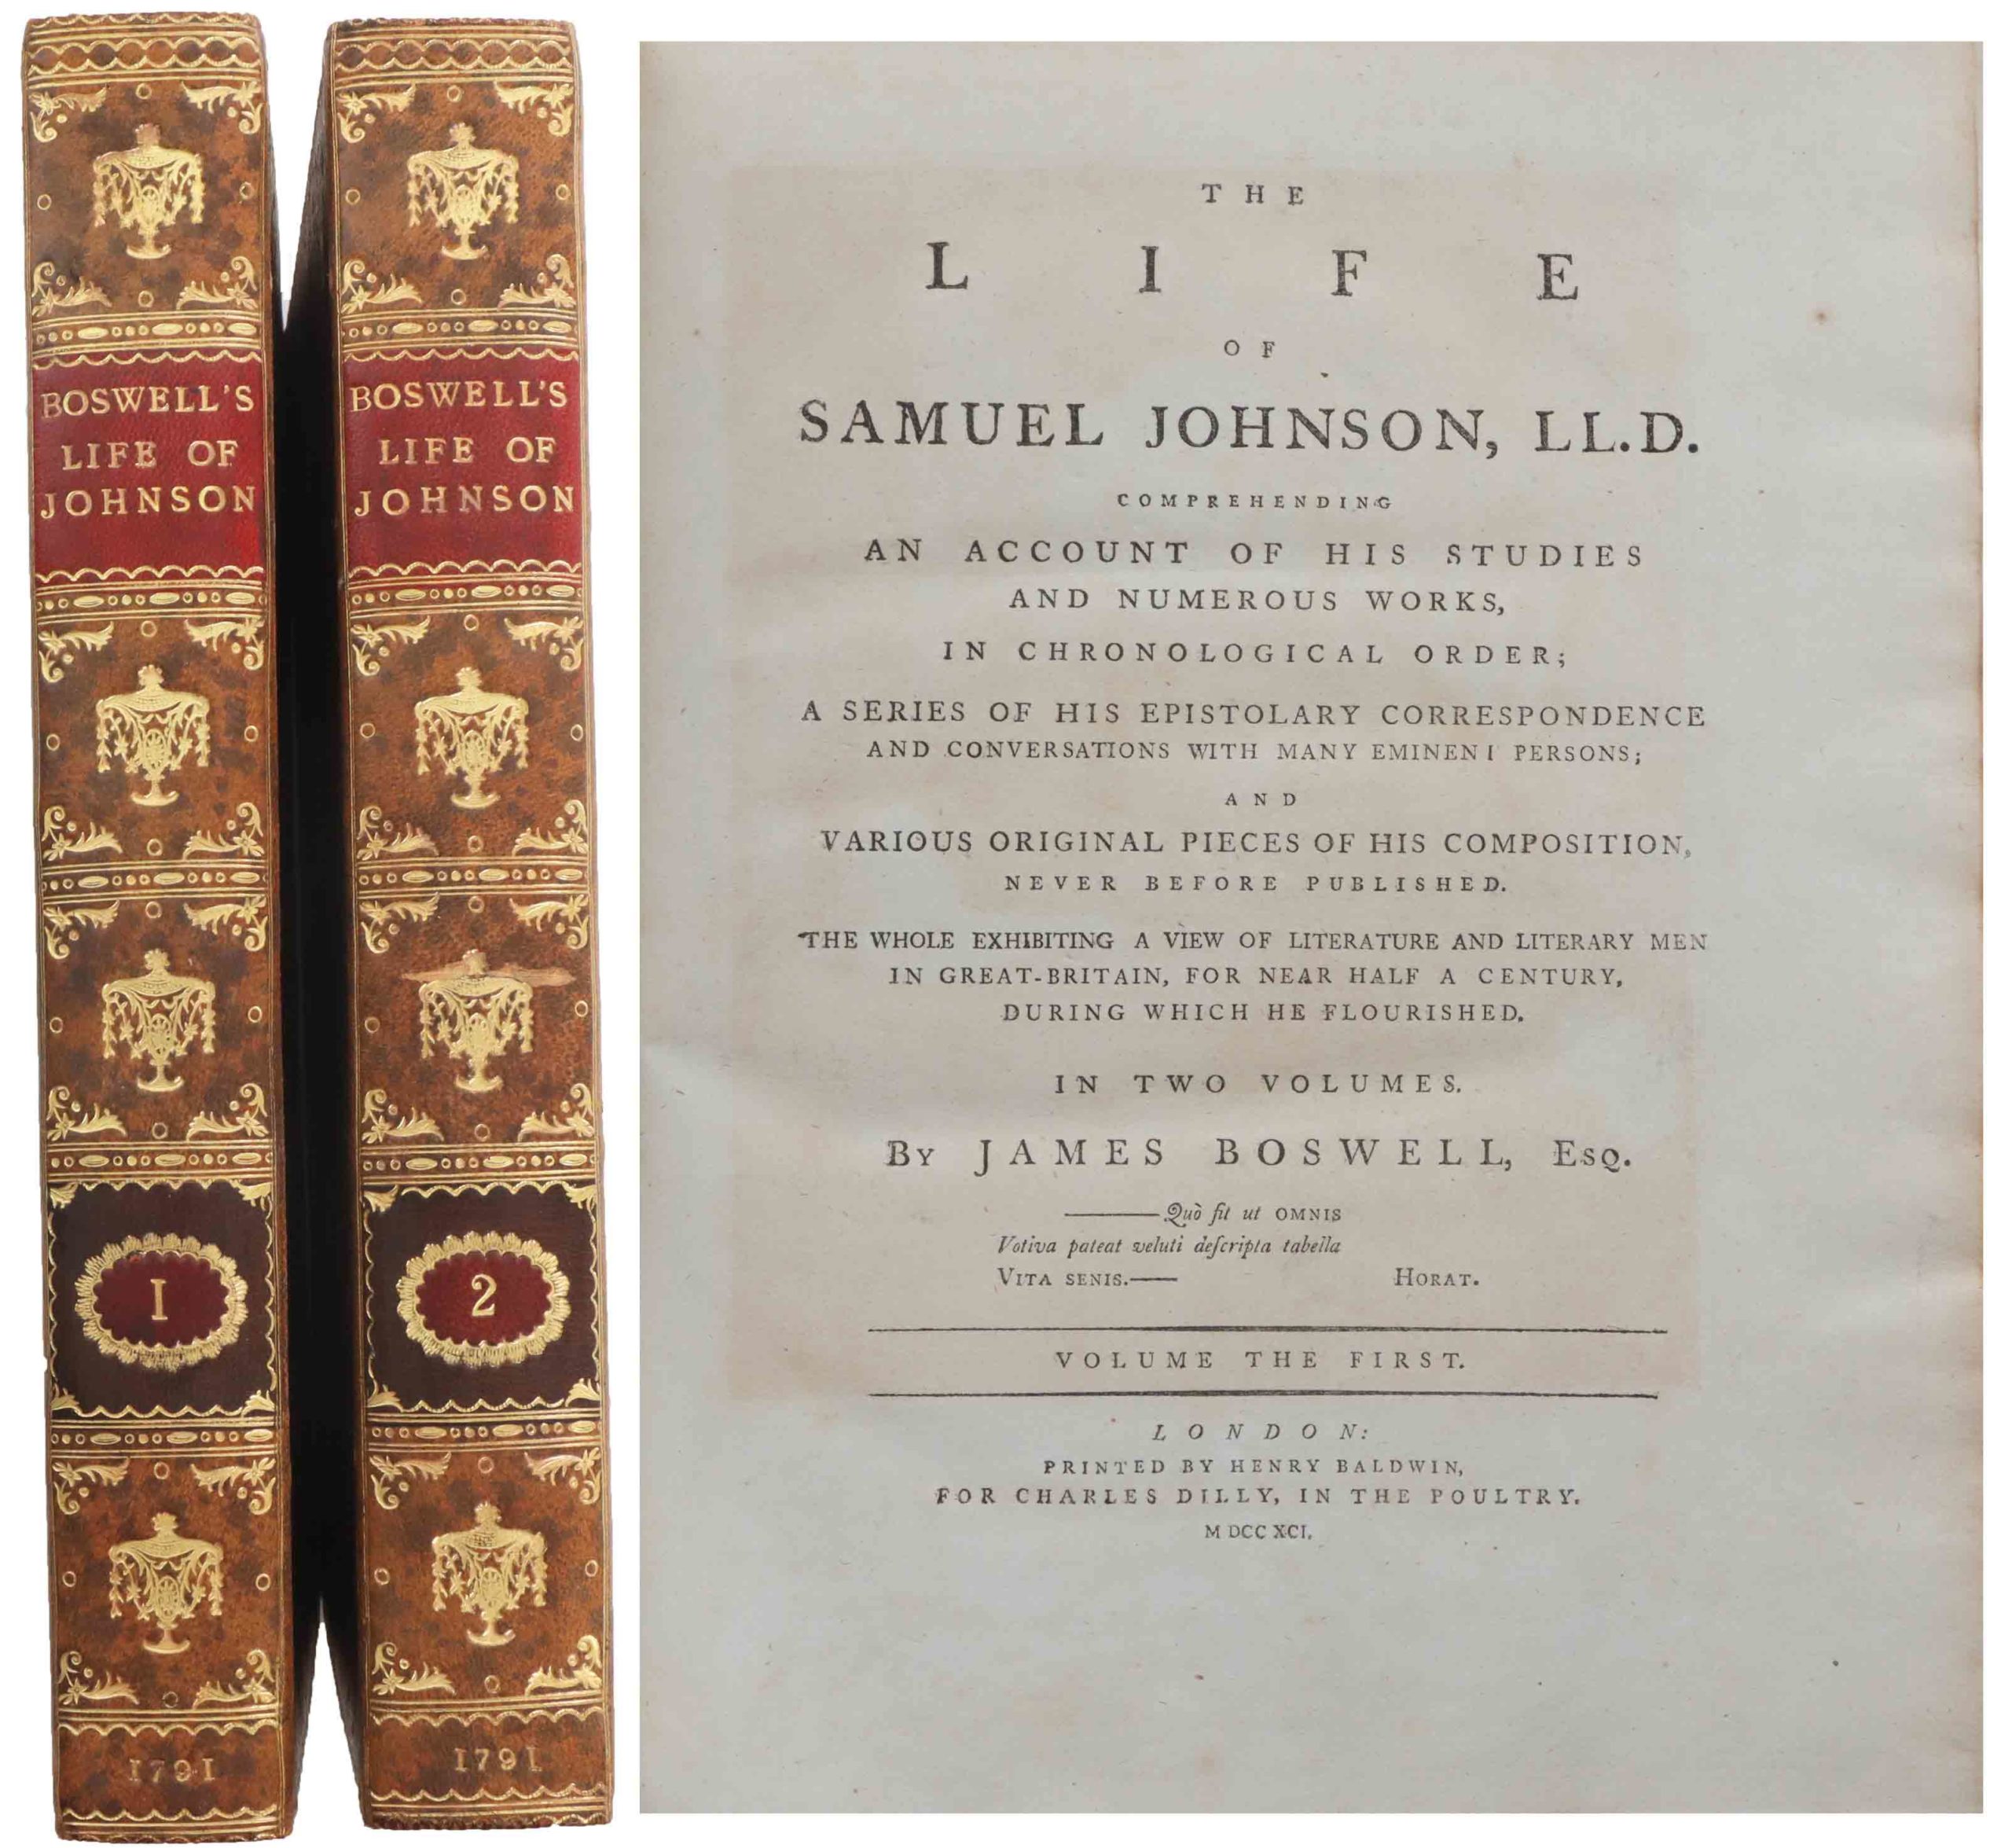 Boswell's Life of Johnson 1791